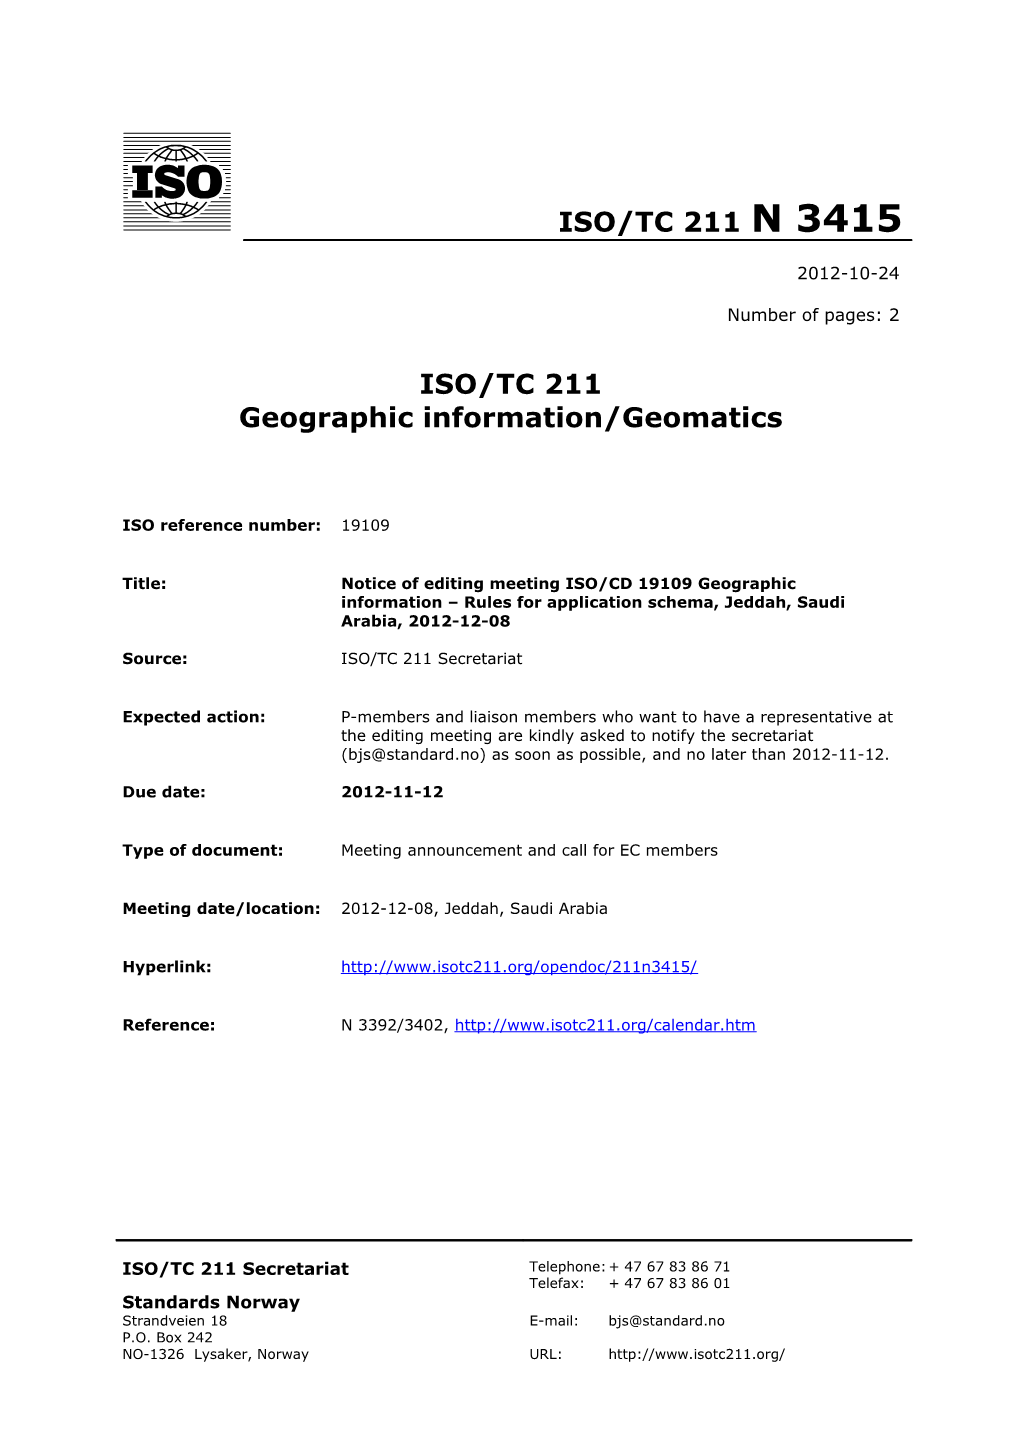 Notice of Editing Meetingiso/CD 19109 Geographic Information Rules for Application Schema